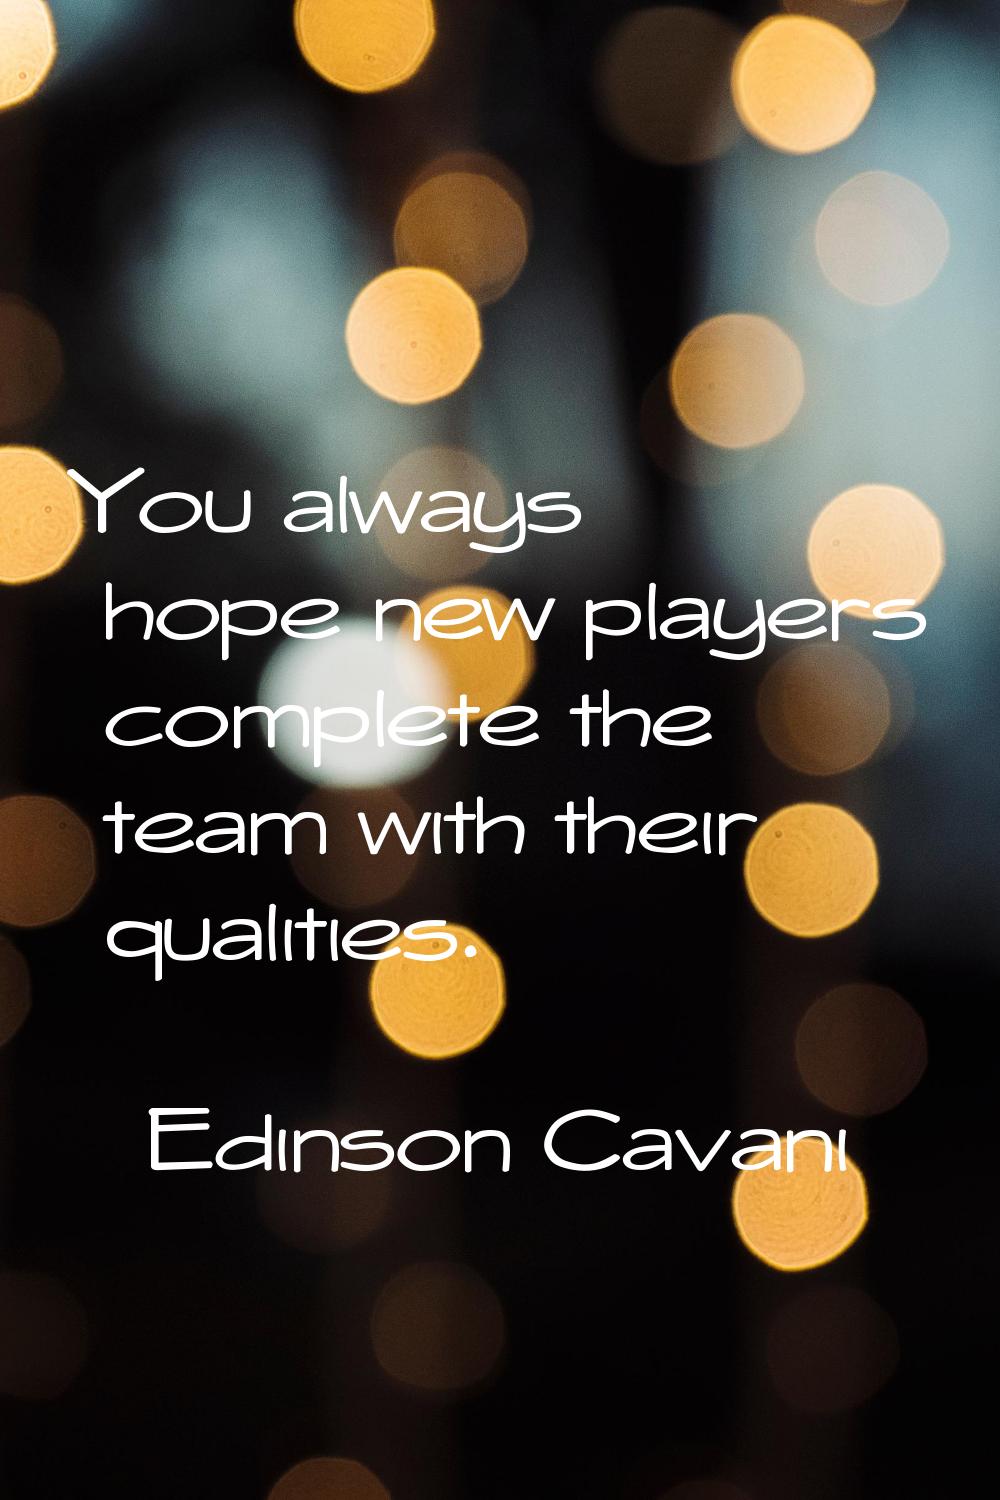 You always hope new players complete the team with their qualities.